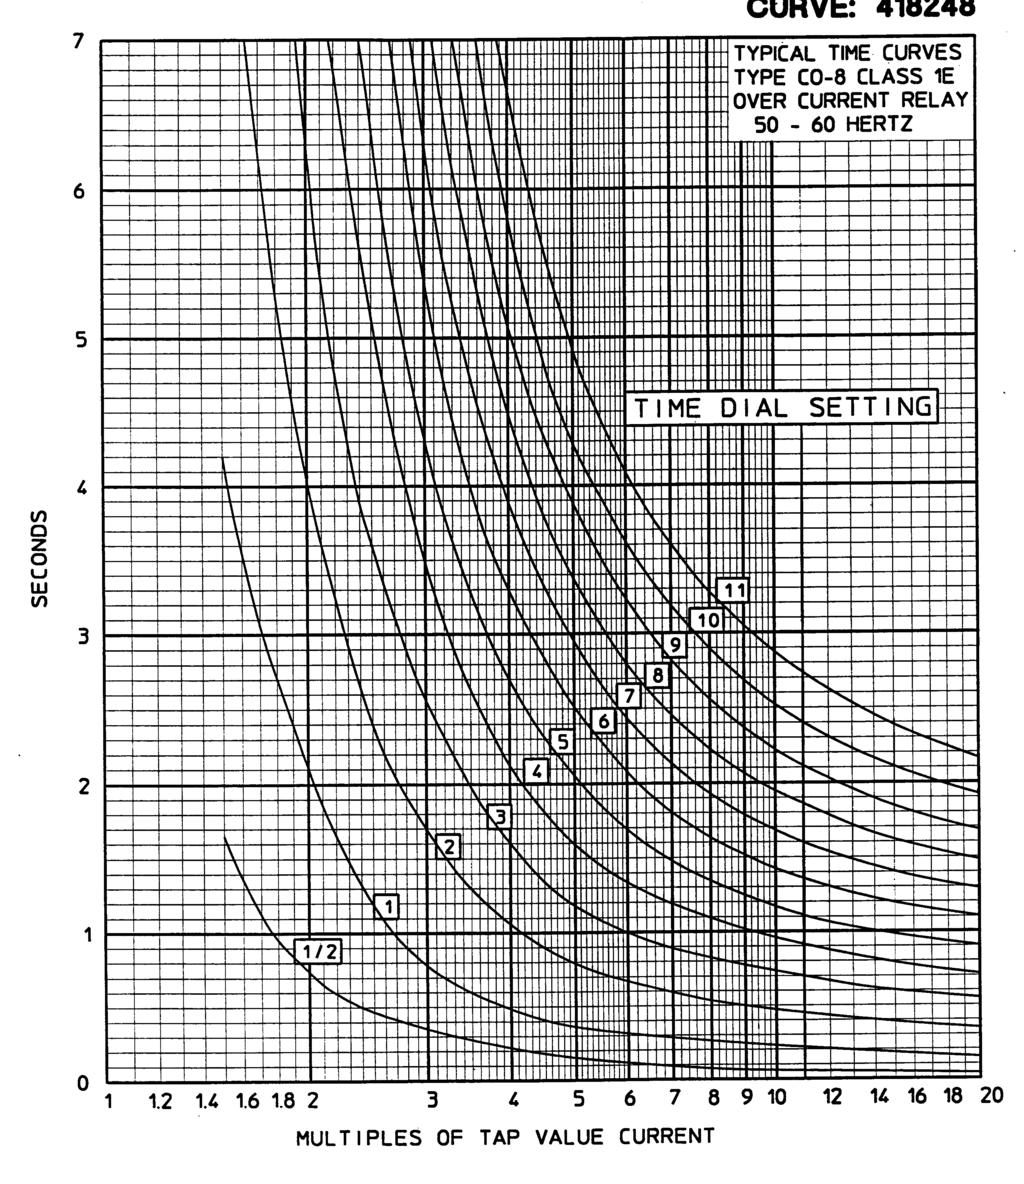 Sub 3 418248 Figure 20: Typical Time Curve of the